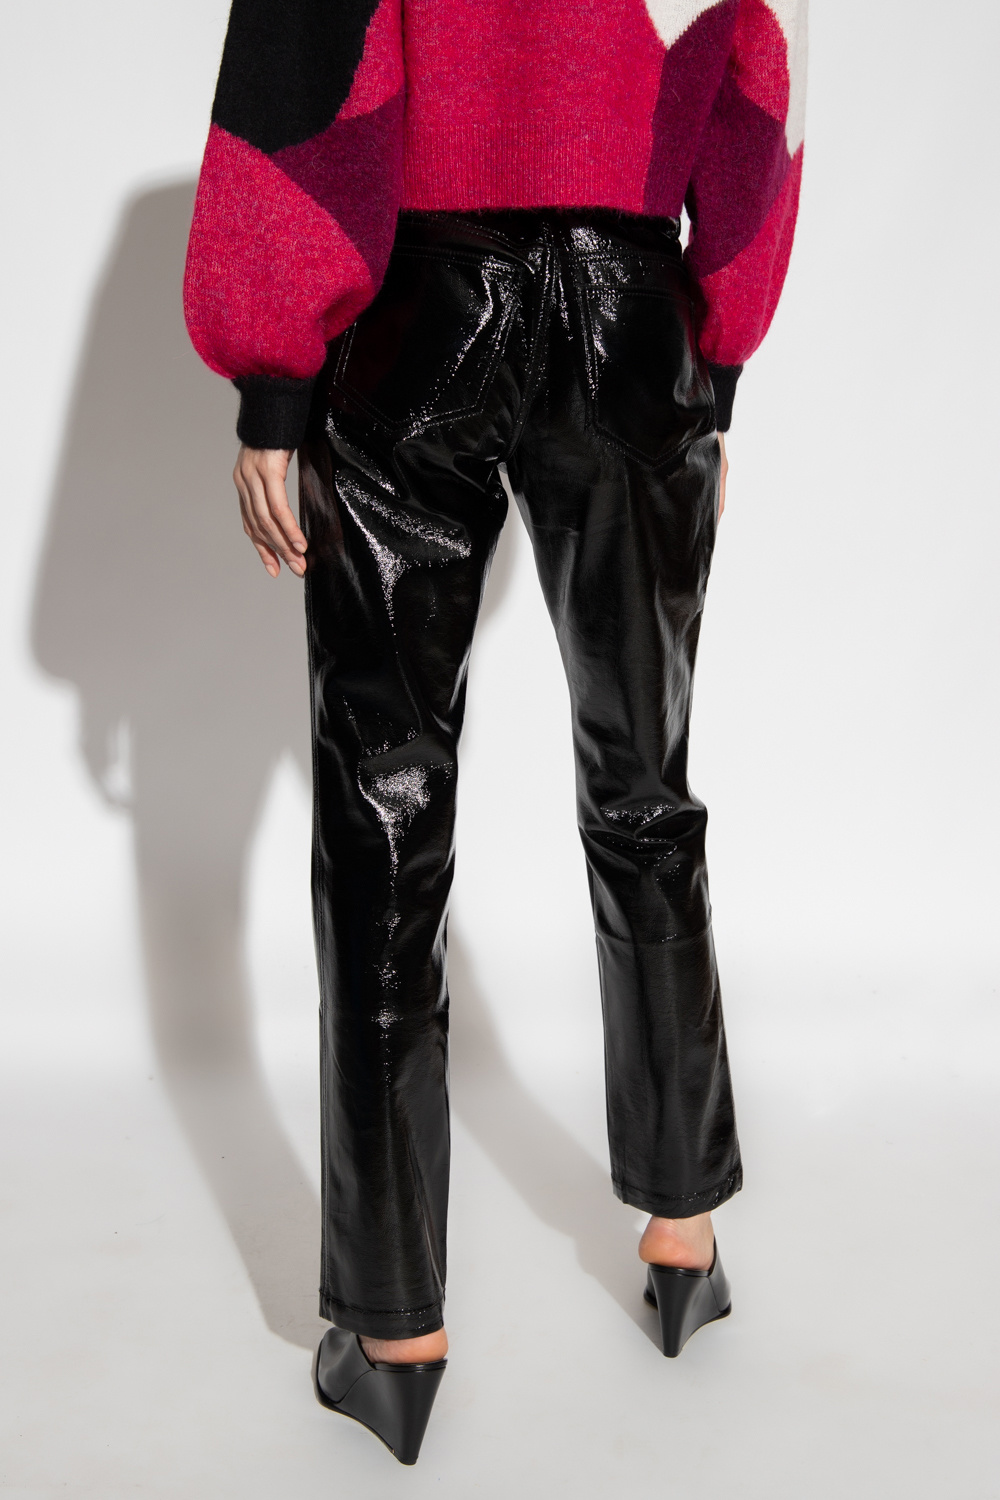 Proenza Schouler White Label Varnished Varley trousers